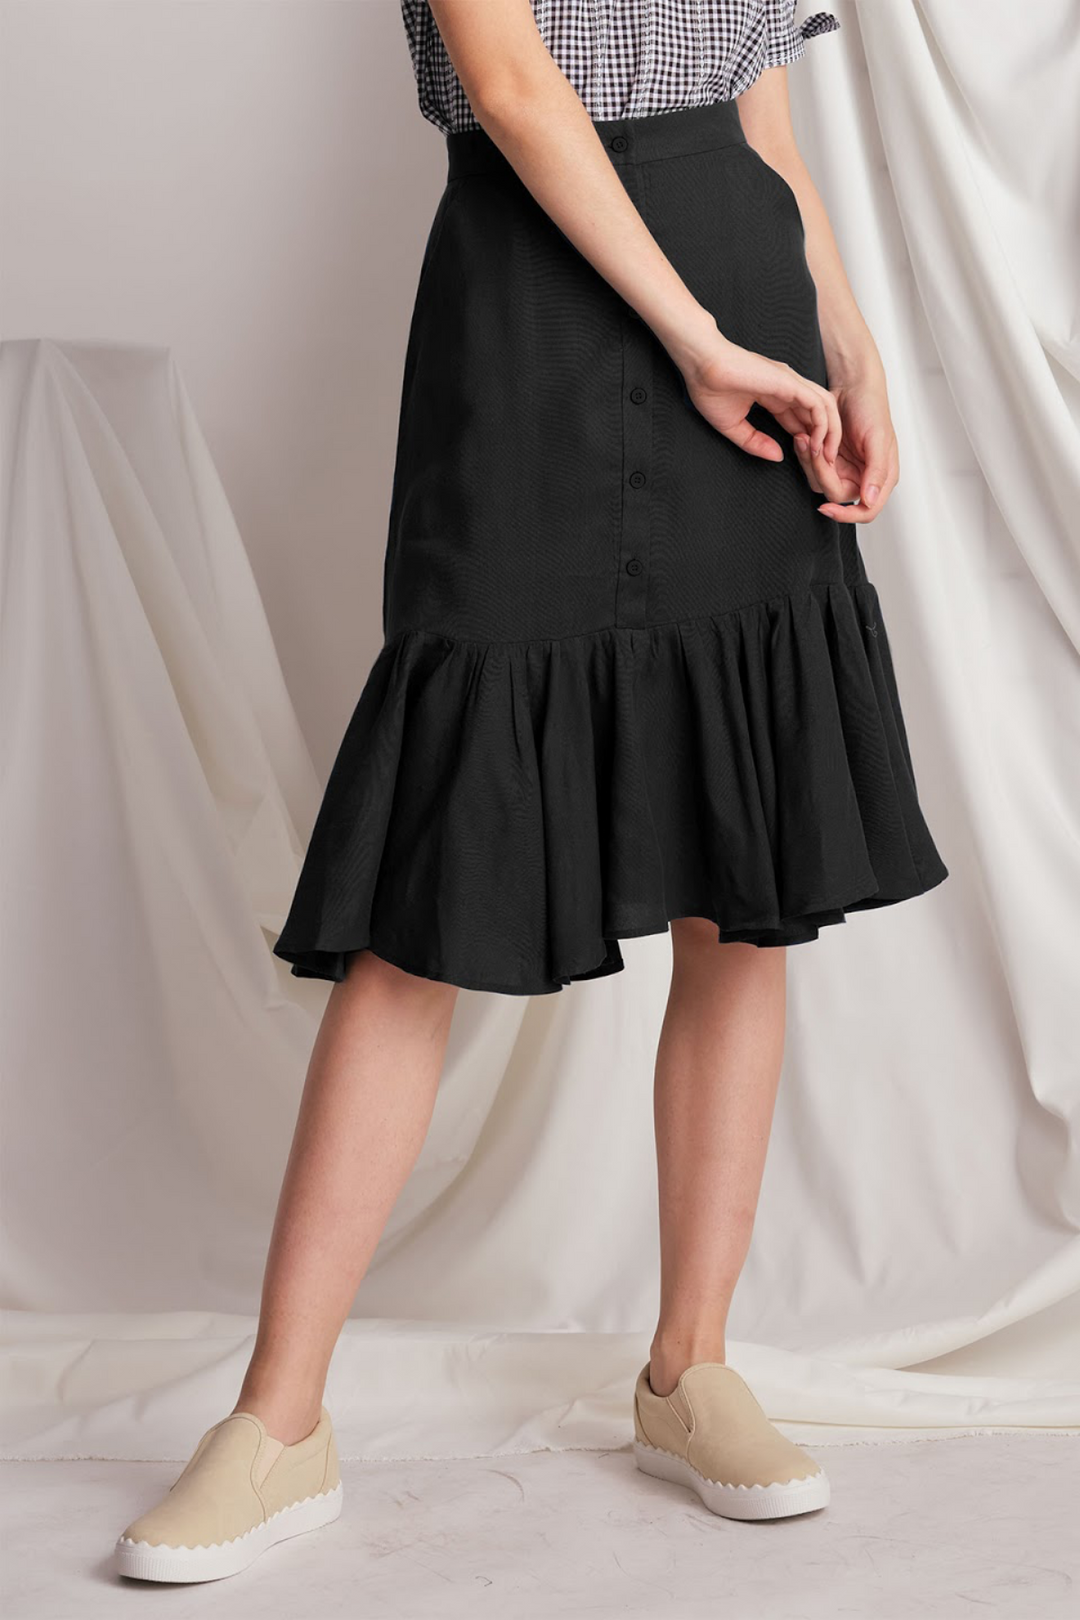 Lily & Lou Louise Skirt in Dark Grey, available in ZERRIN